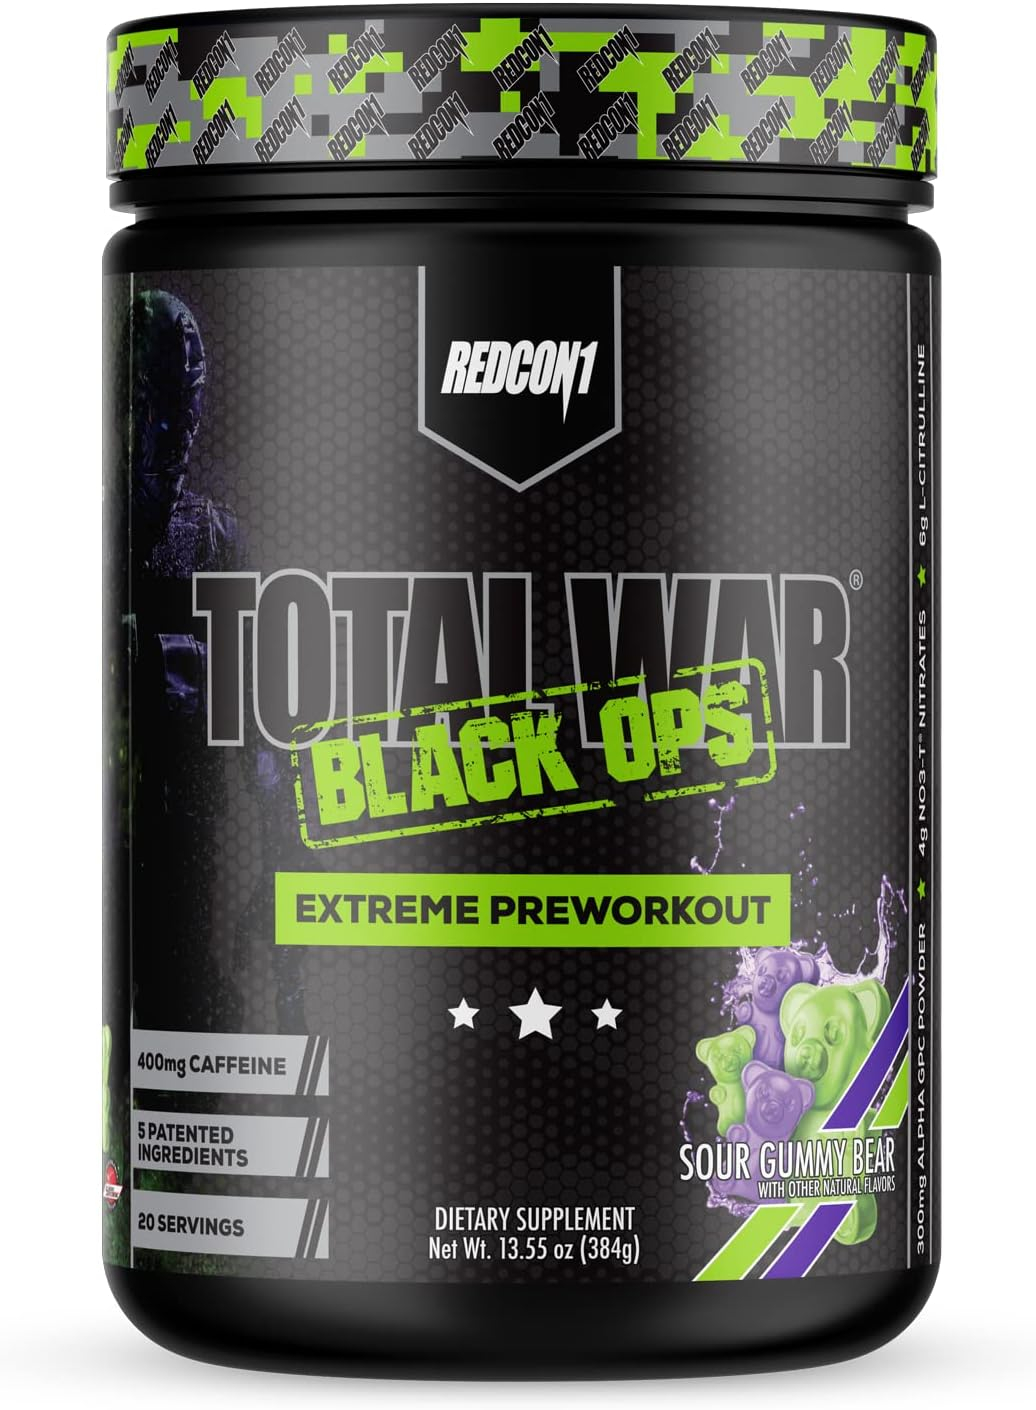 REDCON1 Total War Black Ops Extreme Preworkout Powder, Sour Gummy Bear, High Stimulant, 400 mg Caffeine, NO3-T Nitrates + L-Citrulline, Increase Blood Flow, Muscle Pumps (20 Servings)